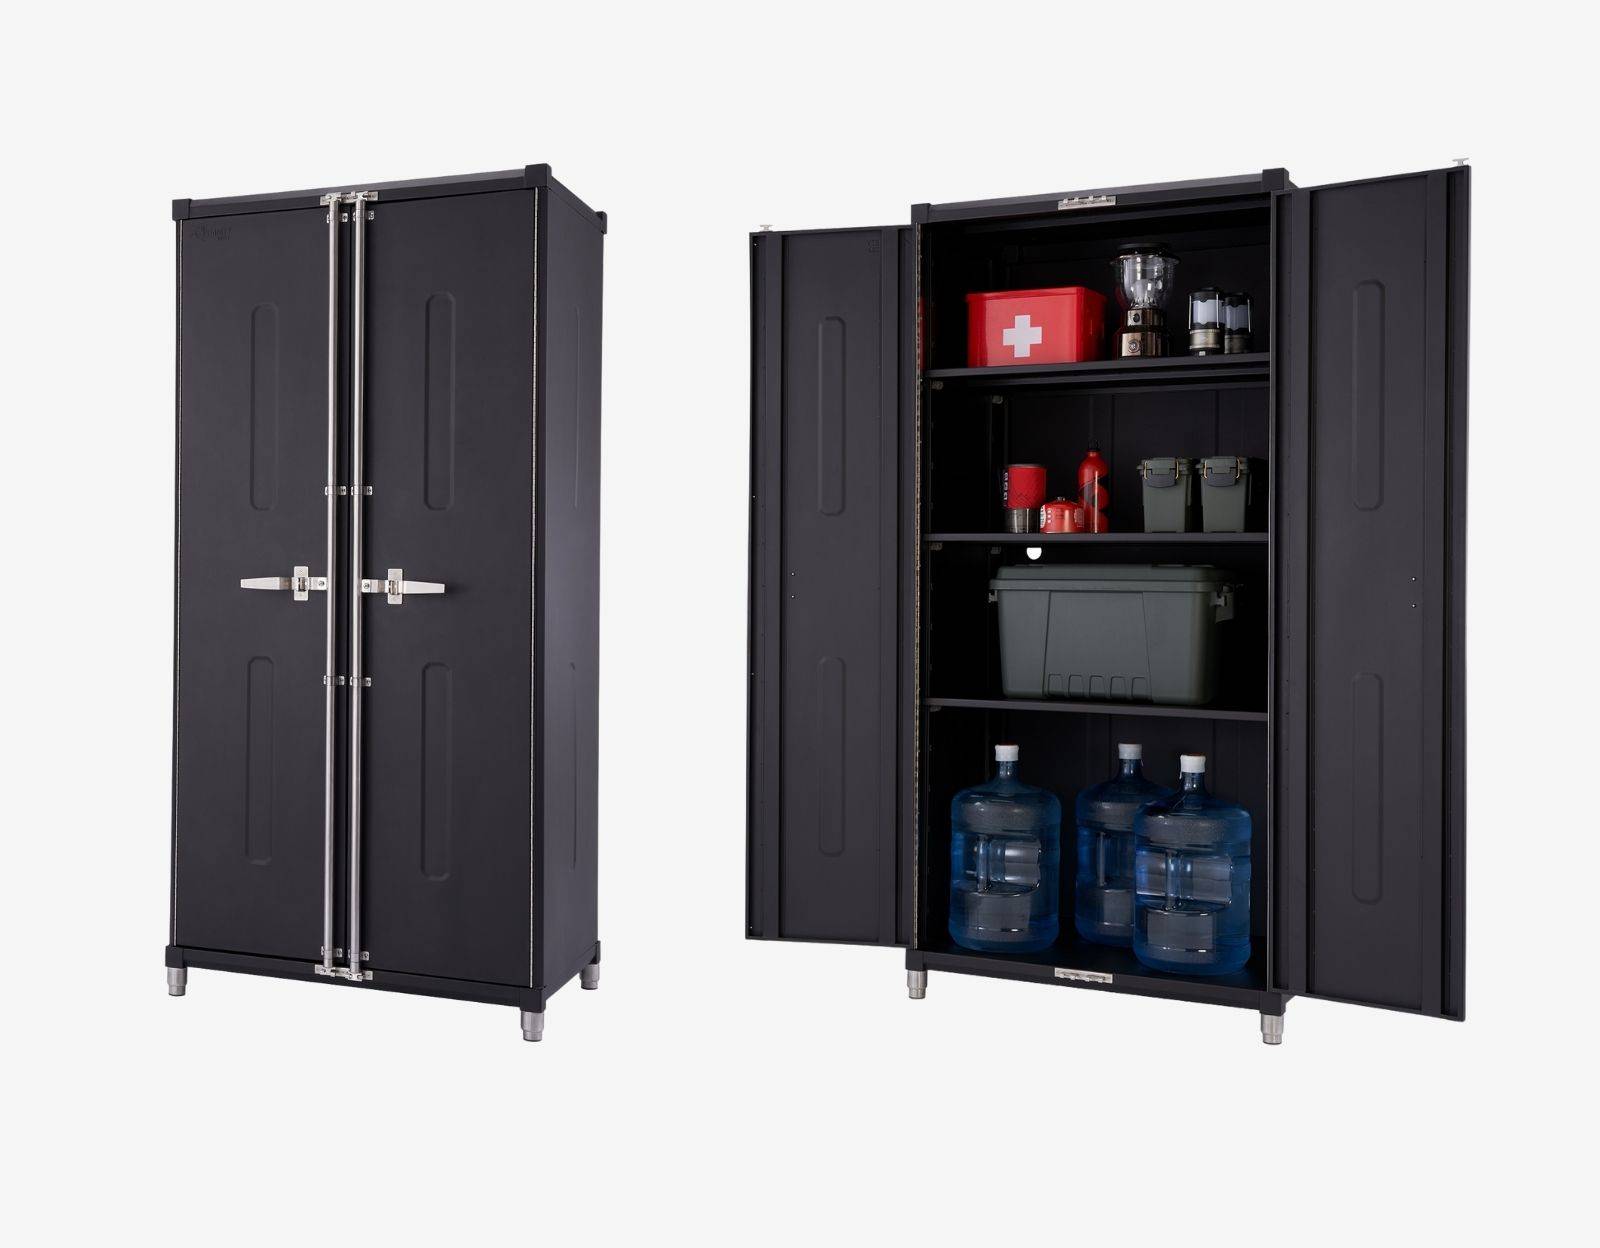 2 locker cabinets, one open and filled with garage and other bulky supplies